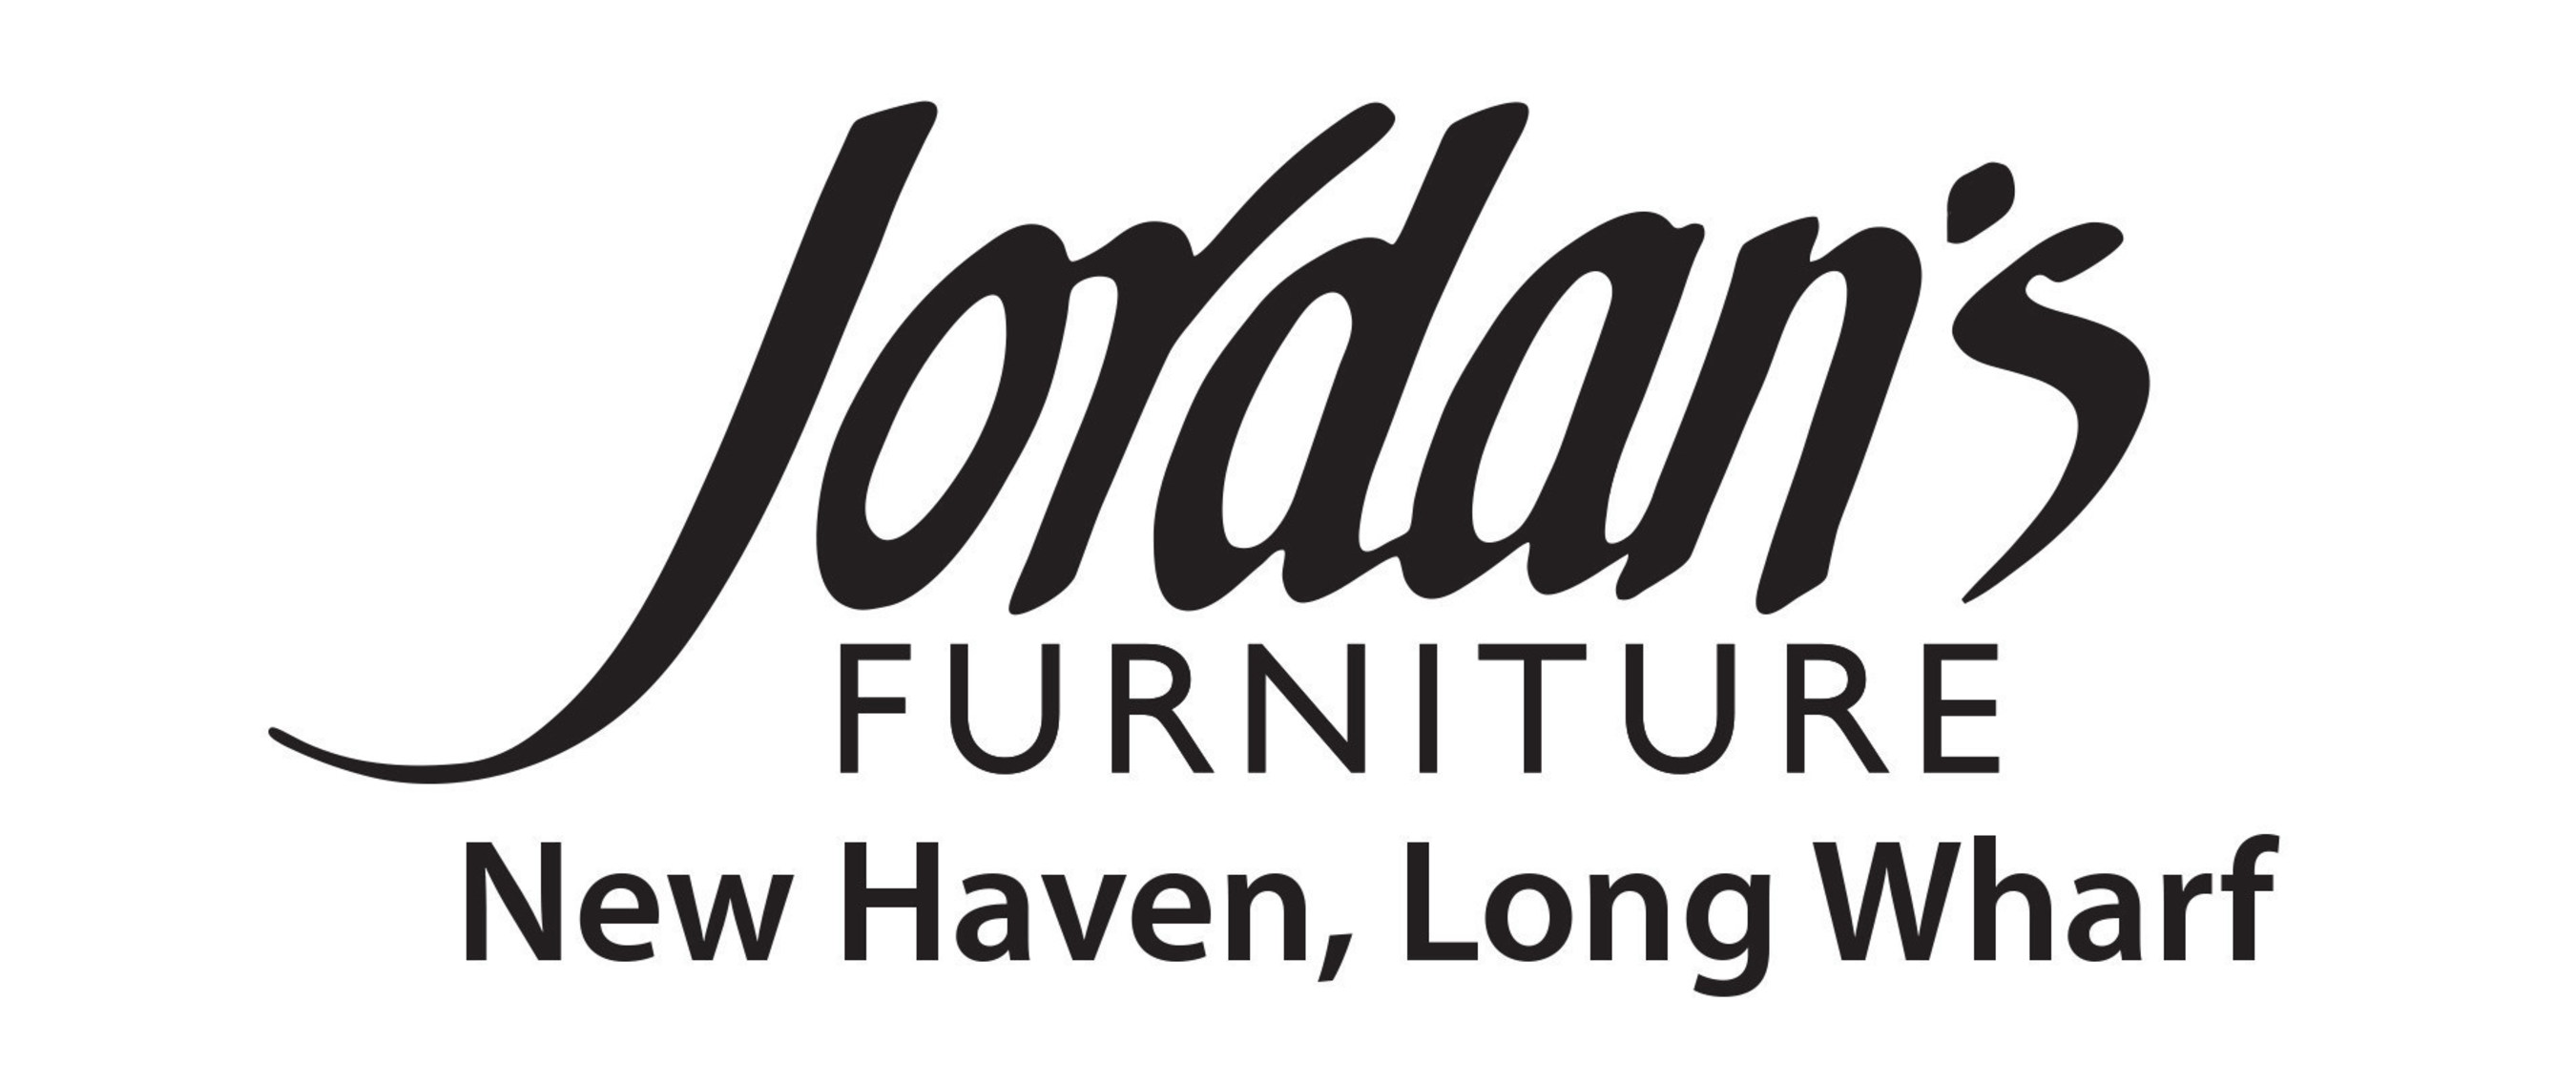 Jordans Furniture Opens Its Sixth Location In New Haven CT